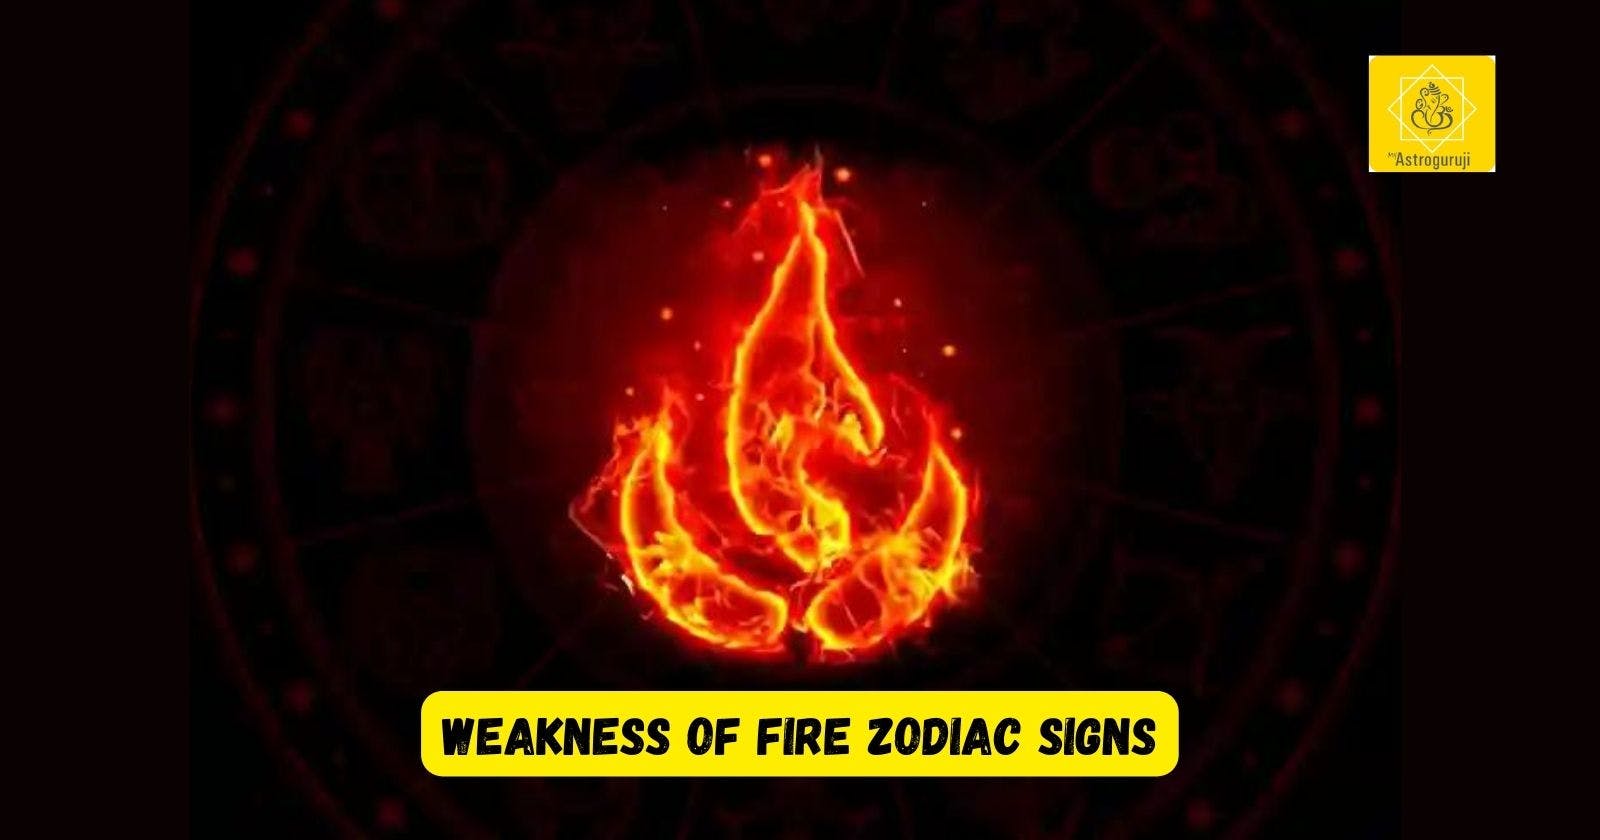 What Are The Weakness of Fire Zodiac Signs ( Aries, Leo, Sagittarius)